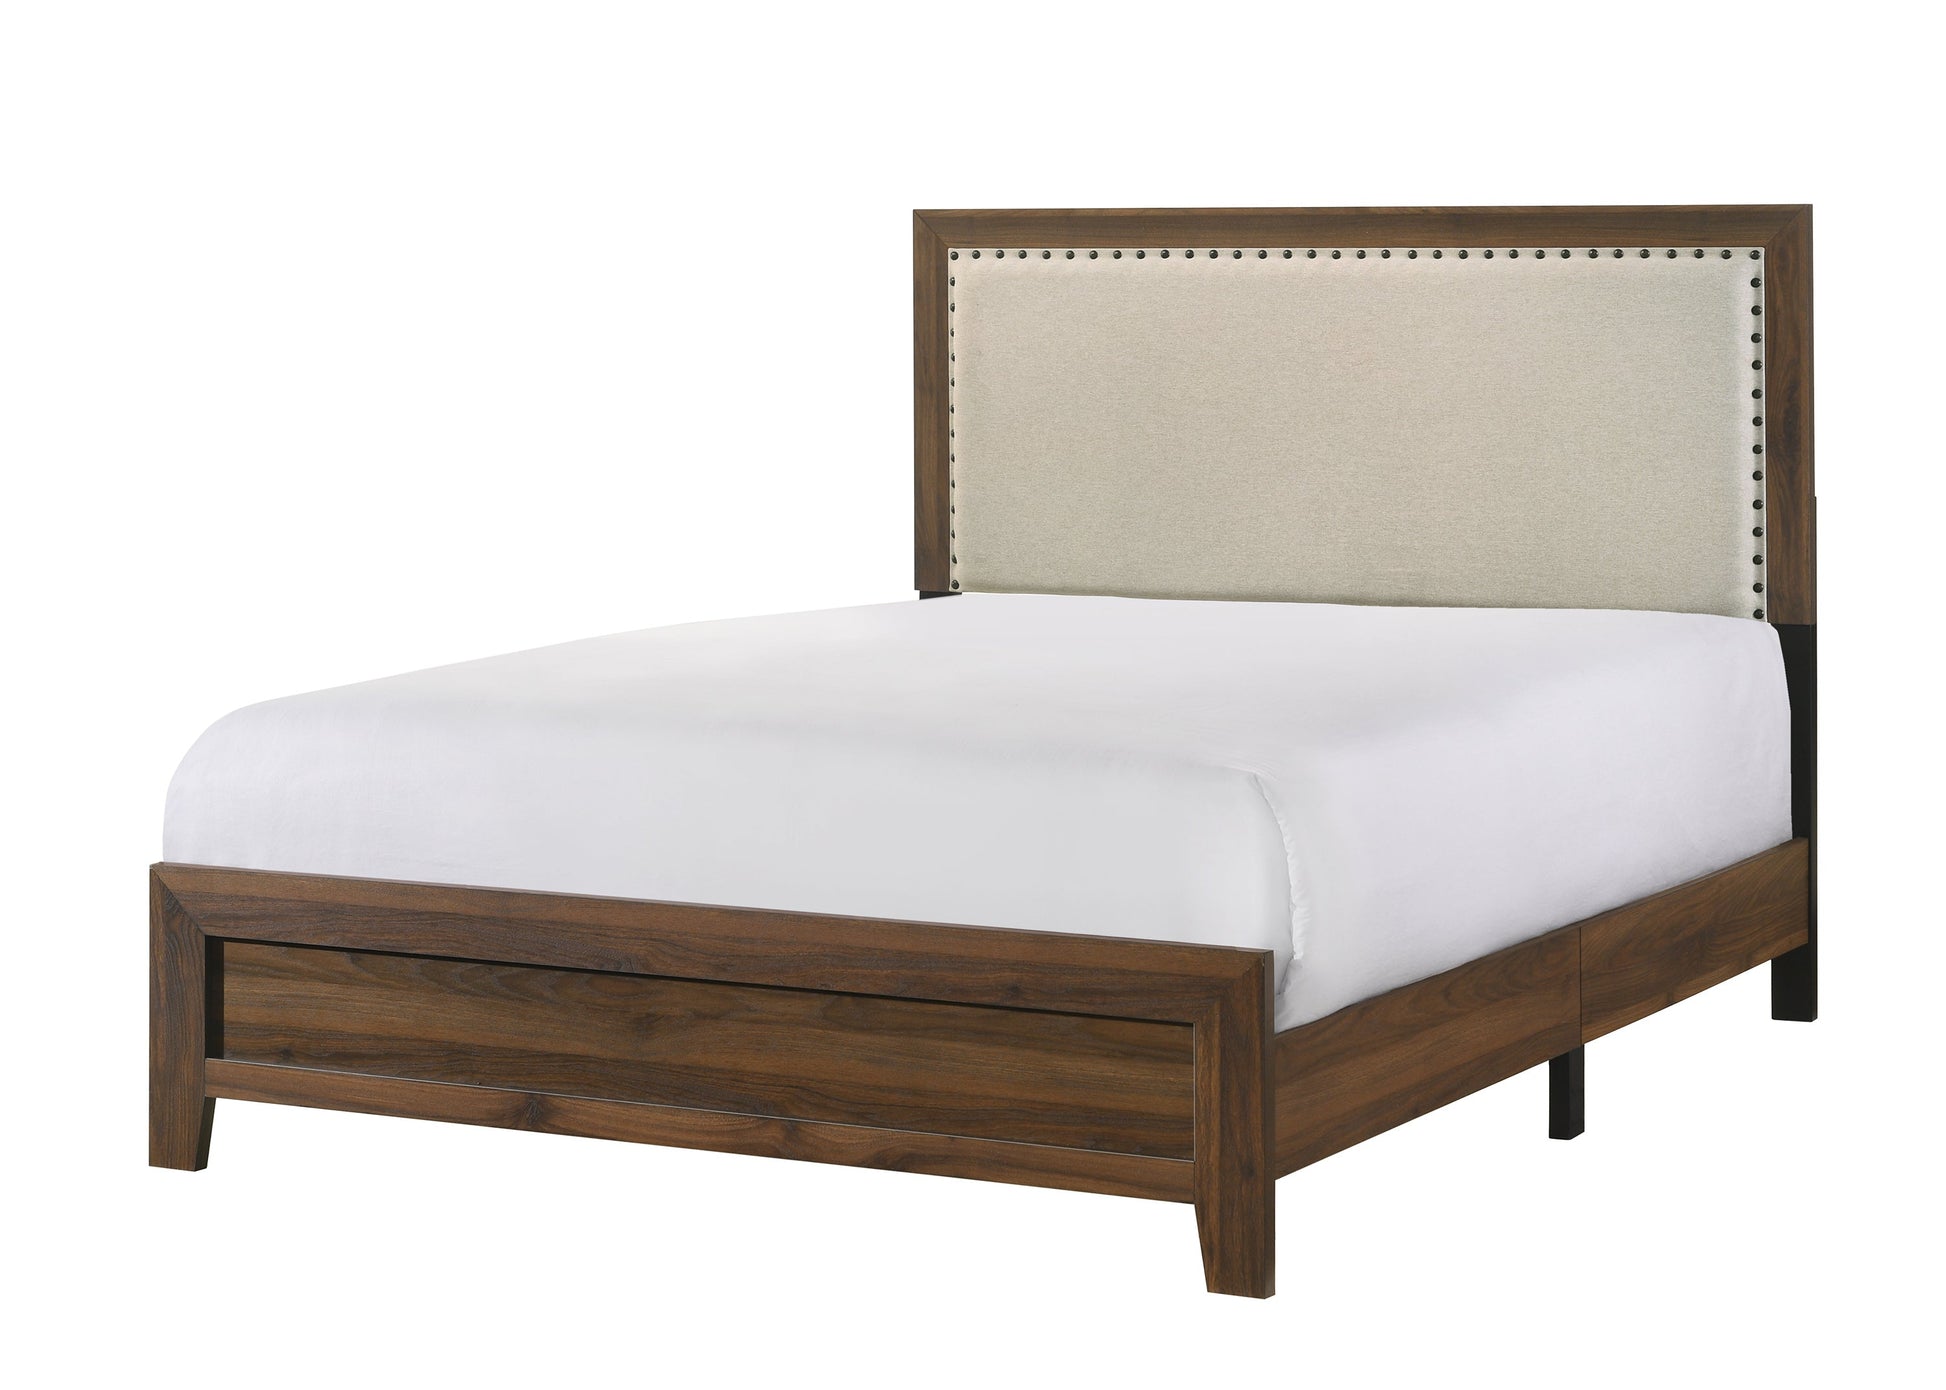 Millie Brown Contemporary Solid Wood And Veneers Fabric Panel Upholstered Bedroom Set